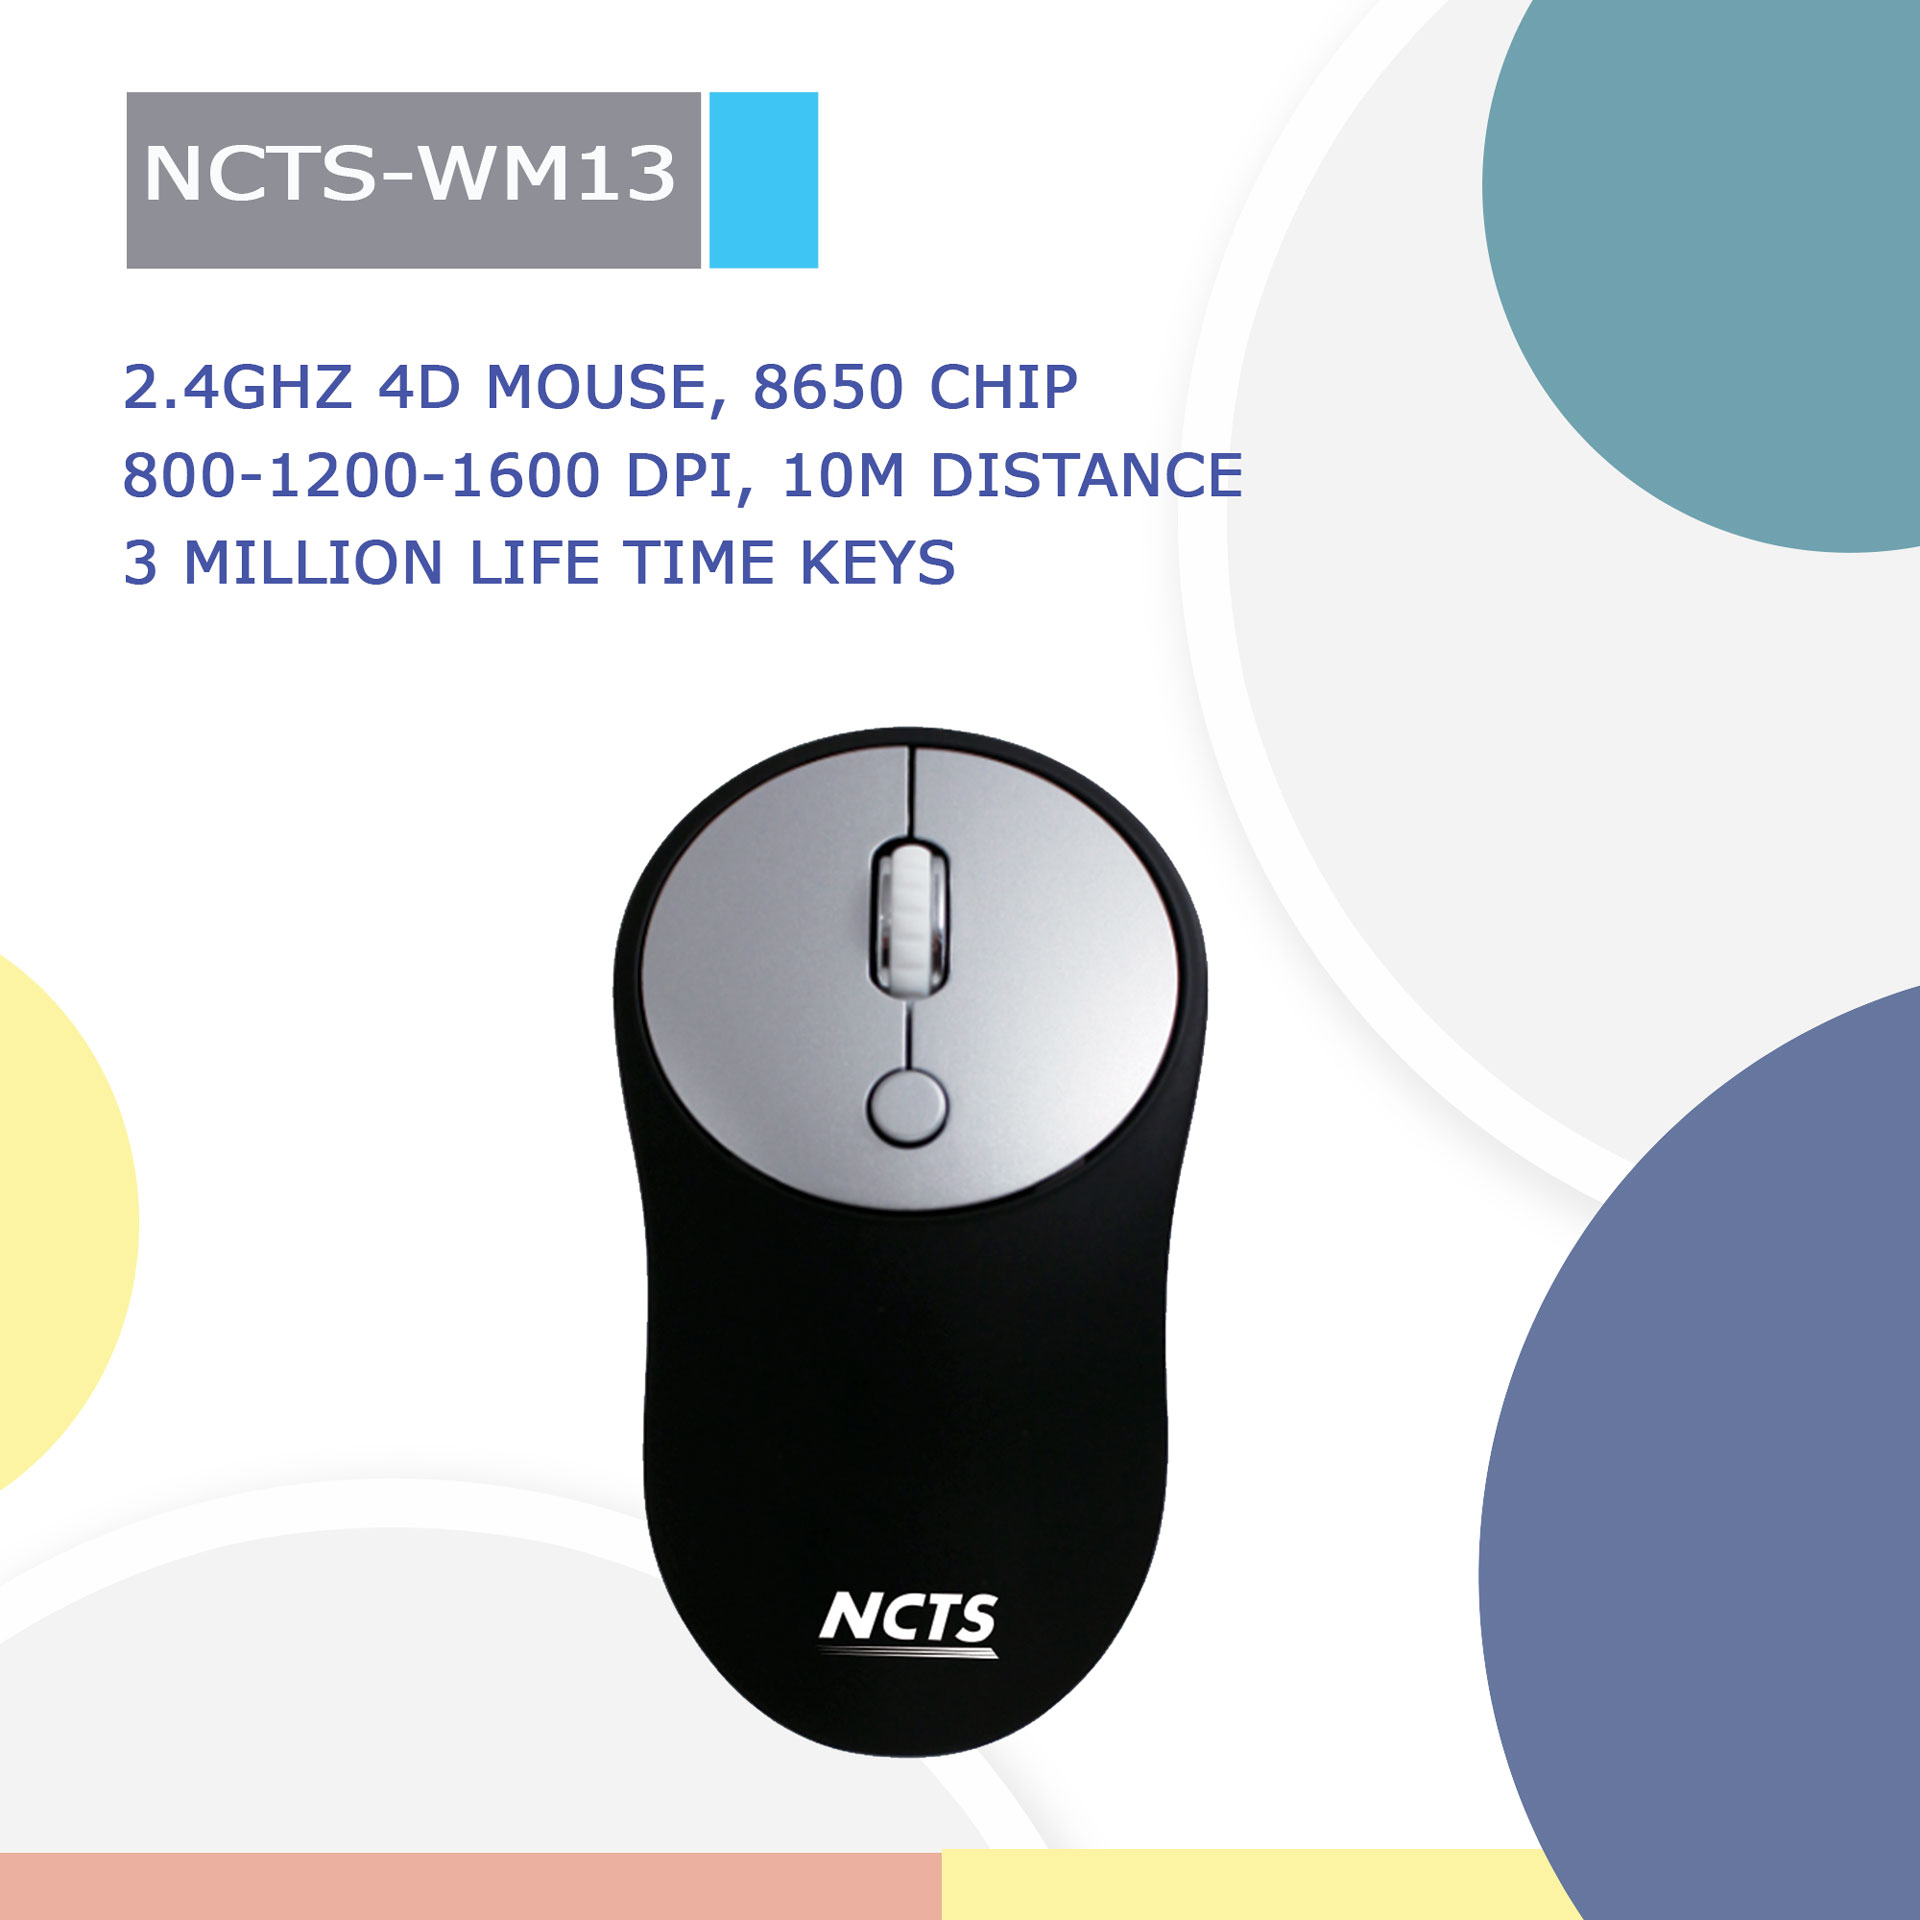 NCTS-WM13